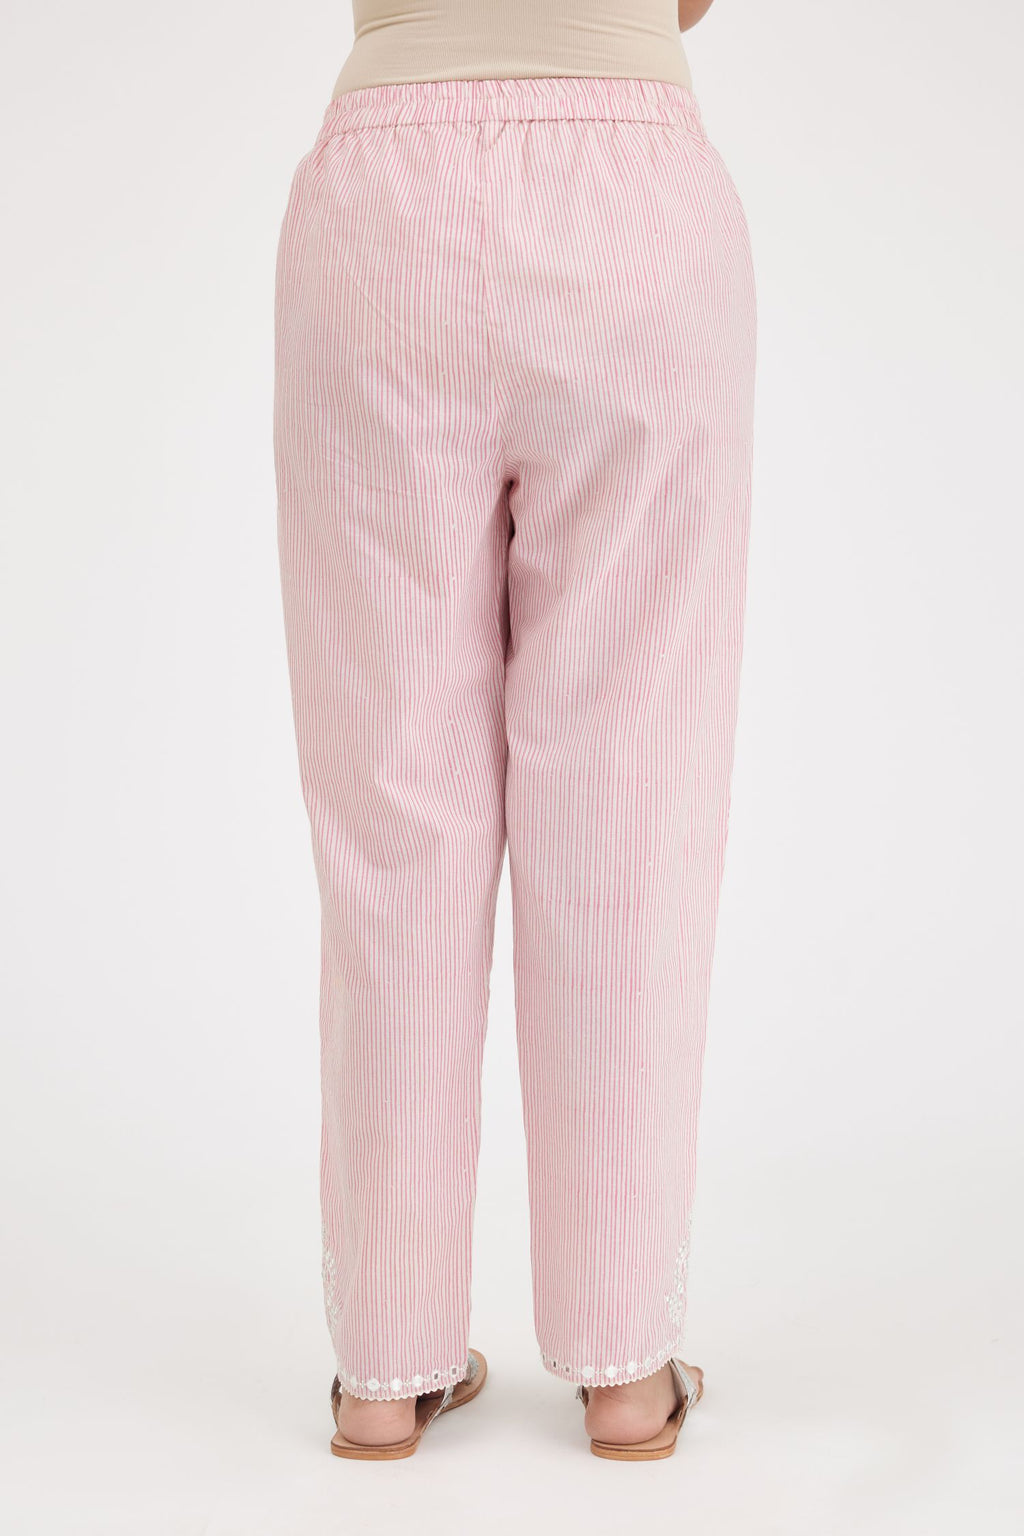 Hand-block printed striped Cotton comfortable fit pant with all-over elasticated waistband.